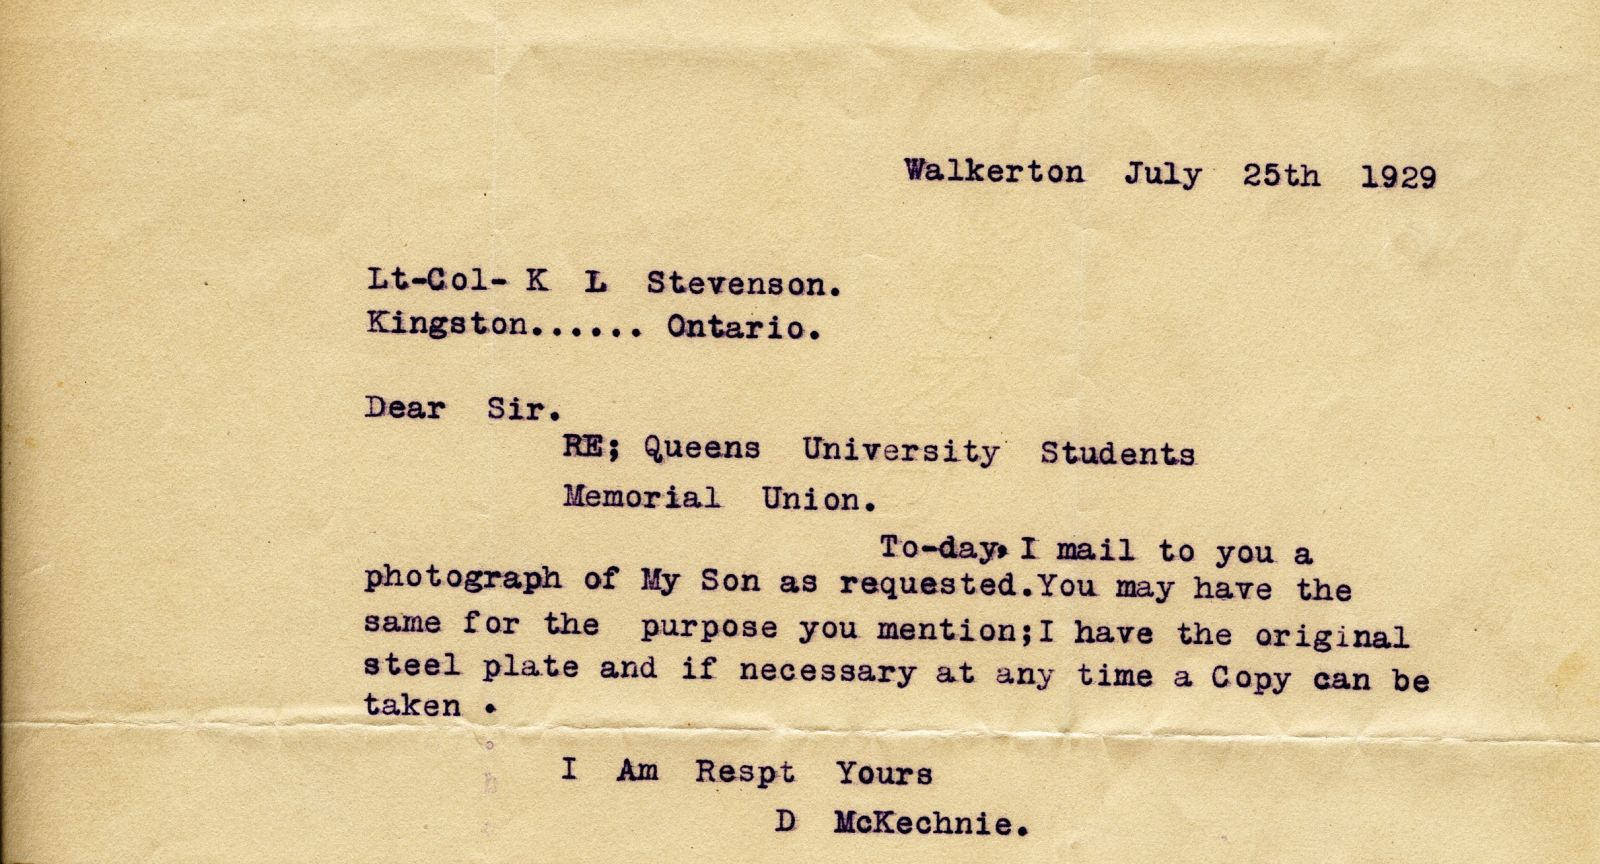 Letter from D McKechnie to Lt. Col. K.L. Stevenson, 25th July 1929